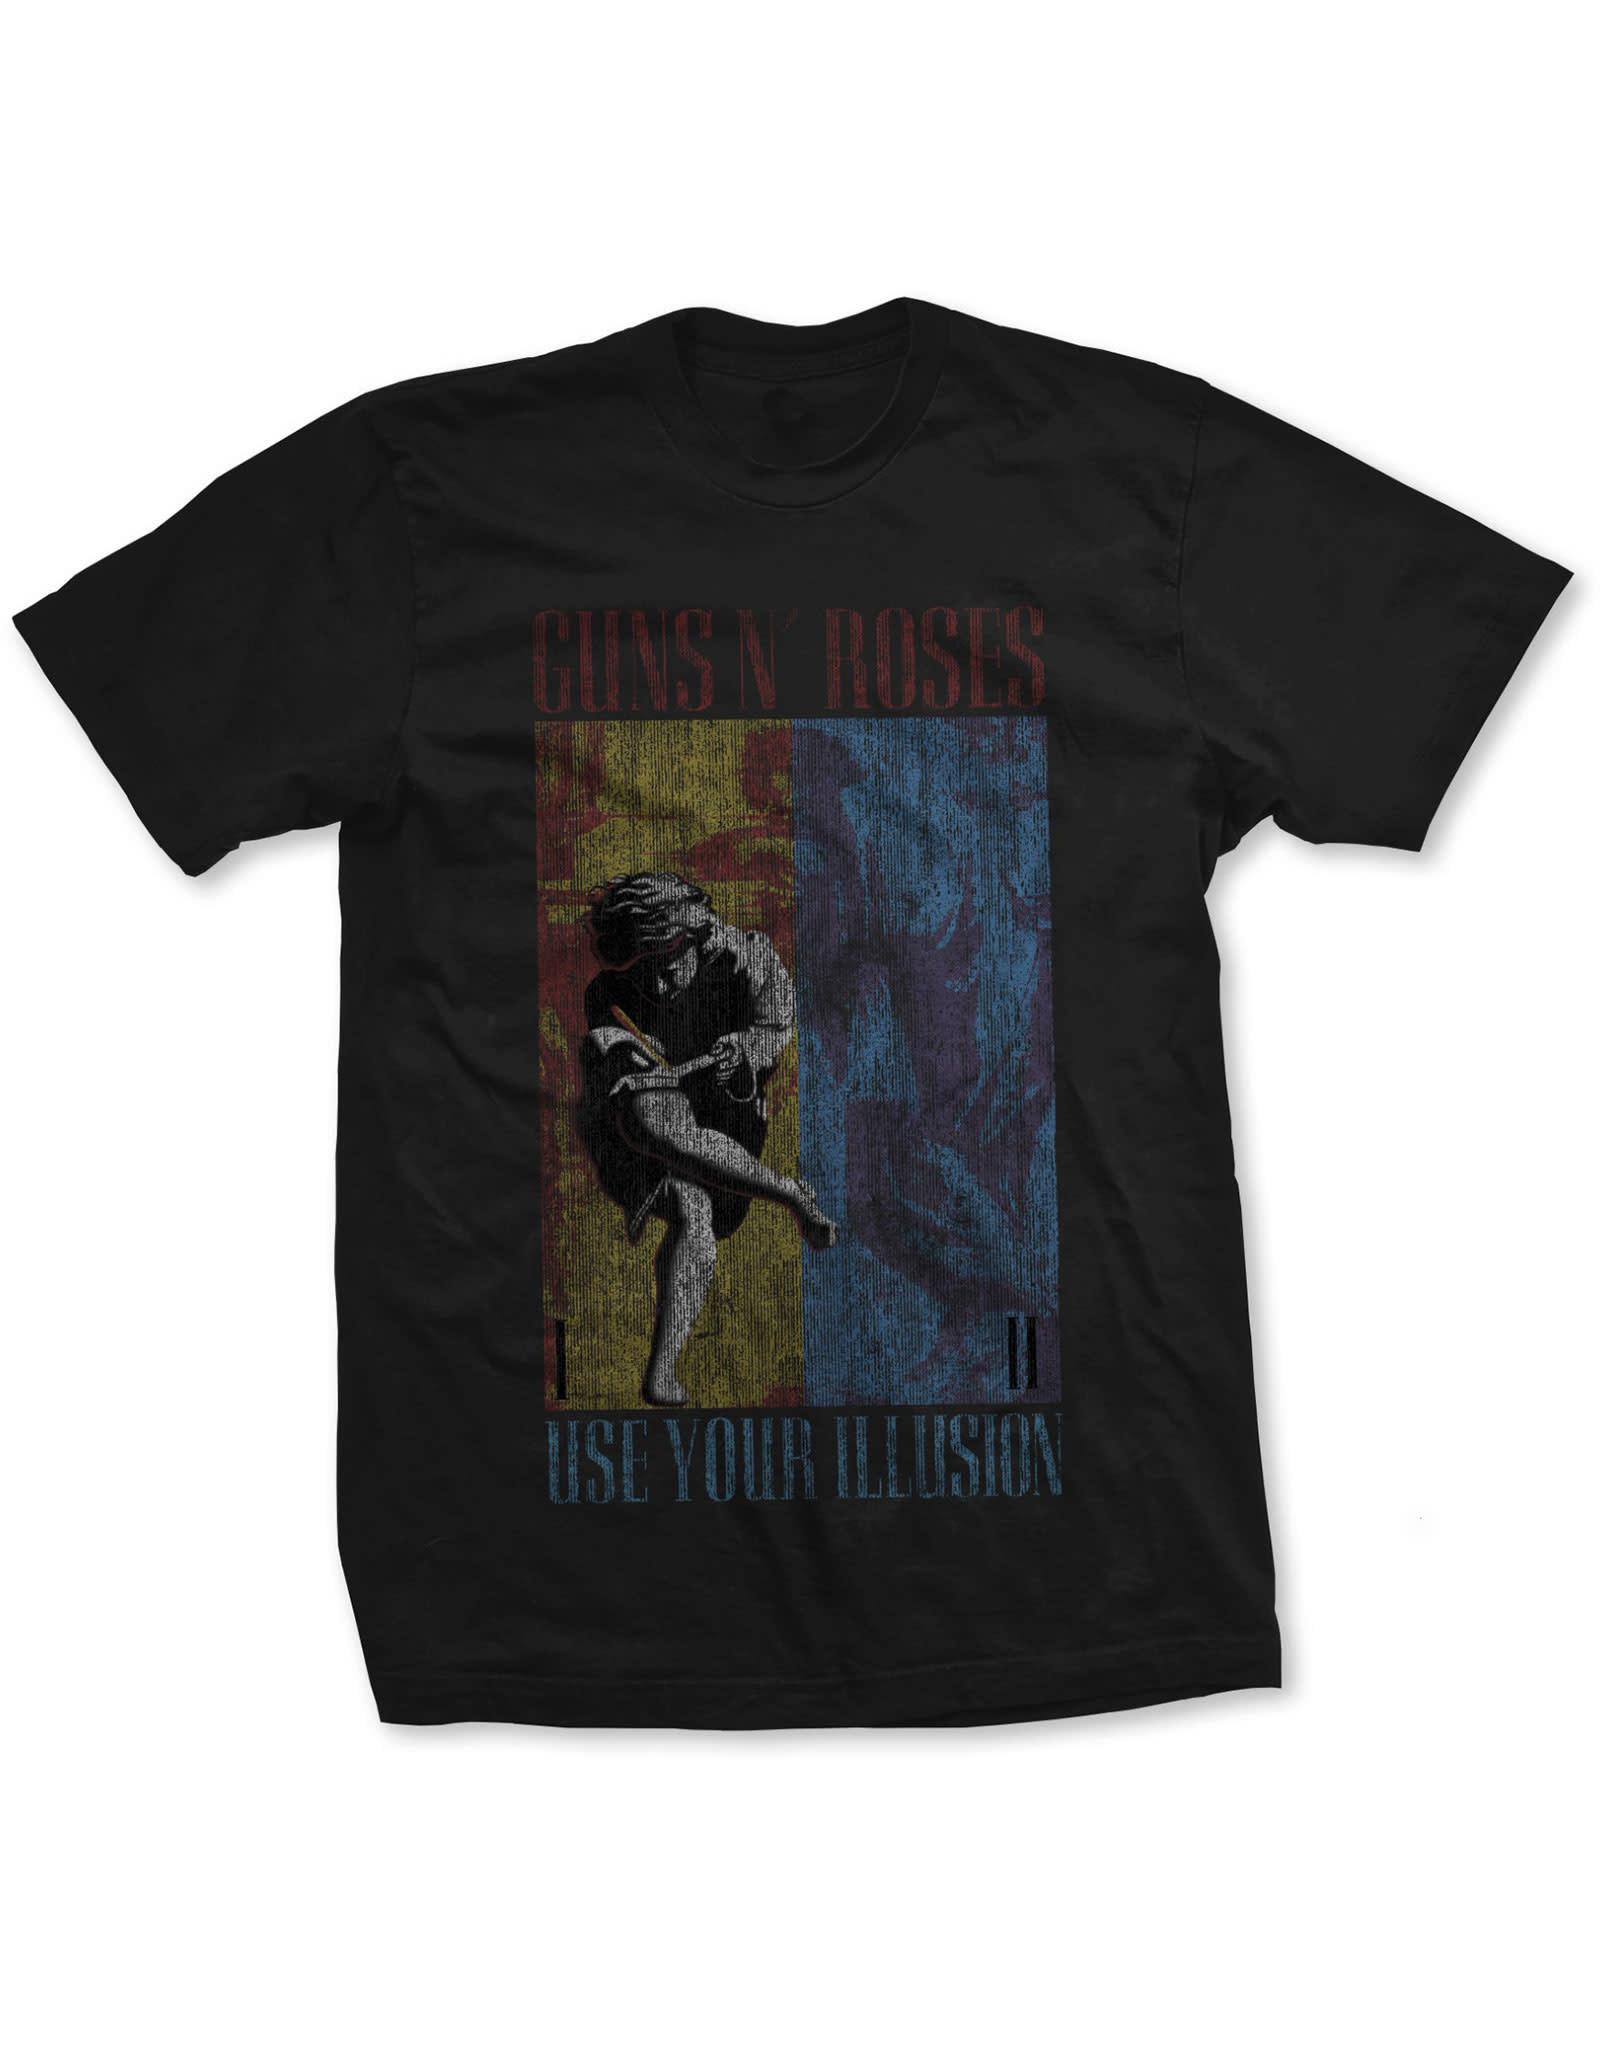 Guns N' Roses / Use Your Illusion Vintage Tee